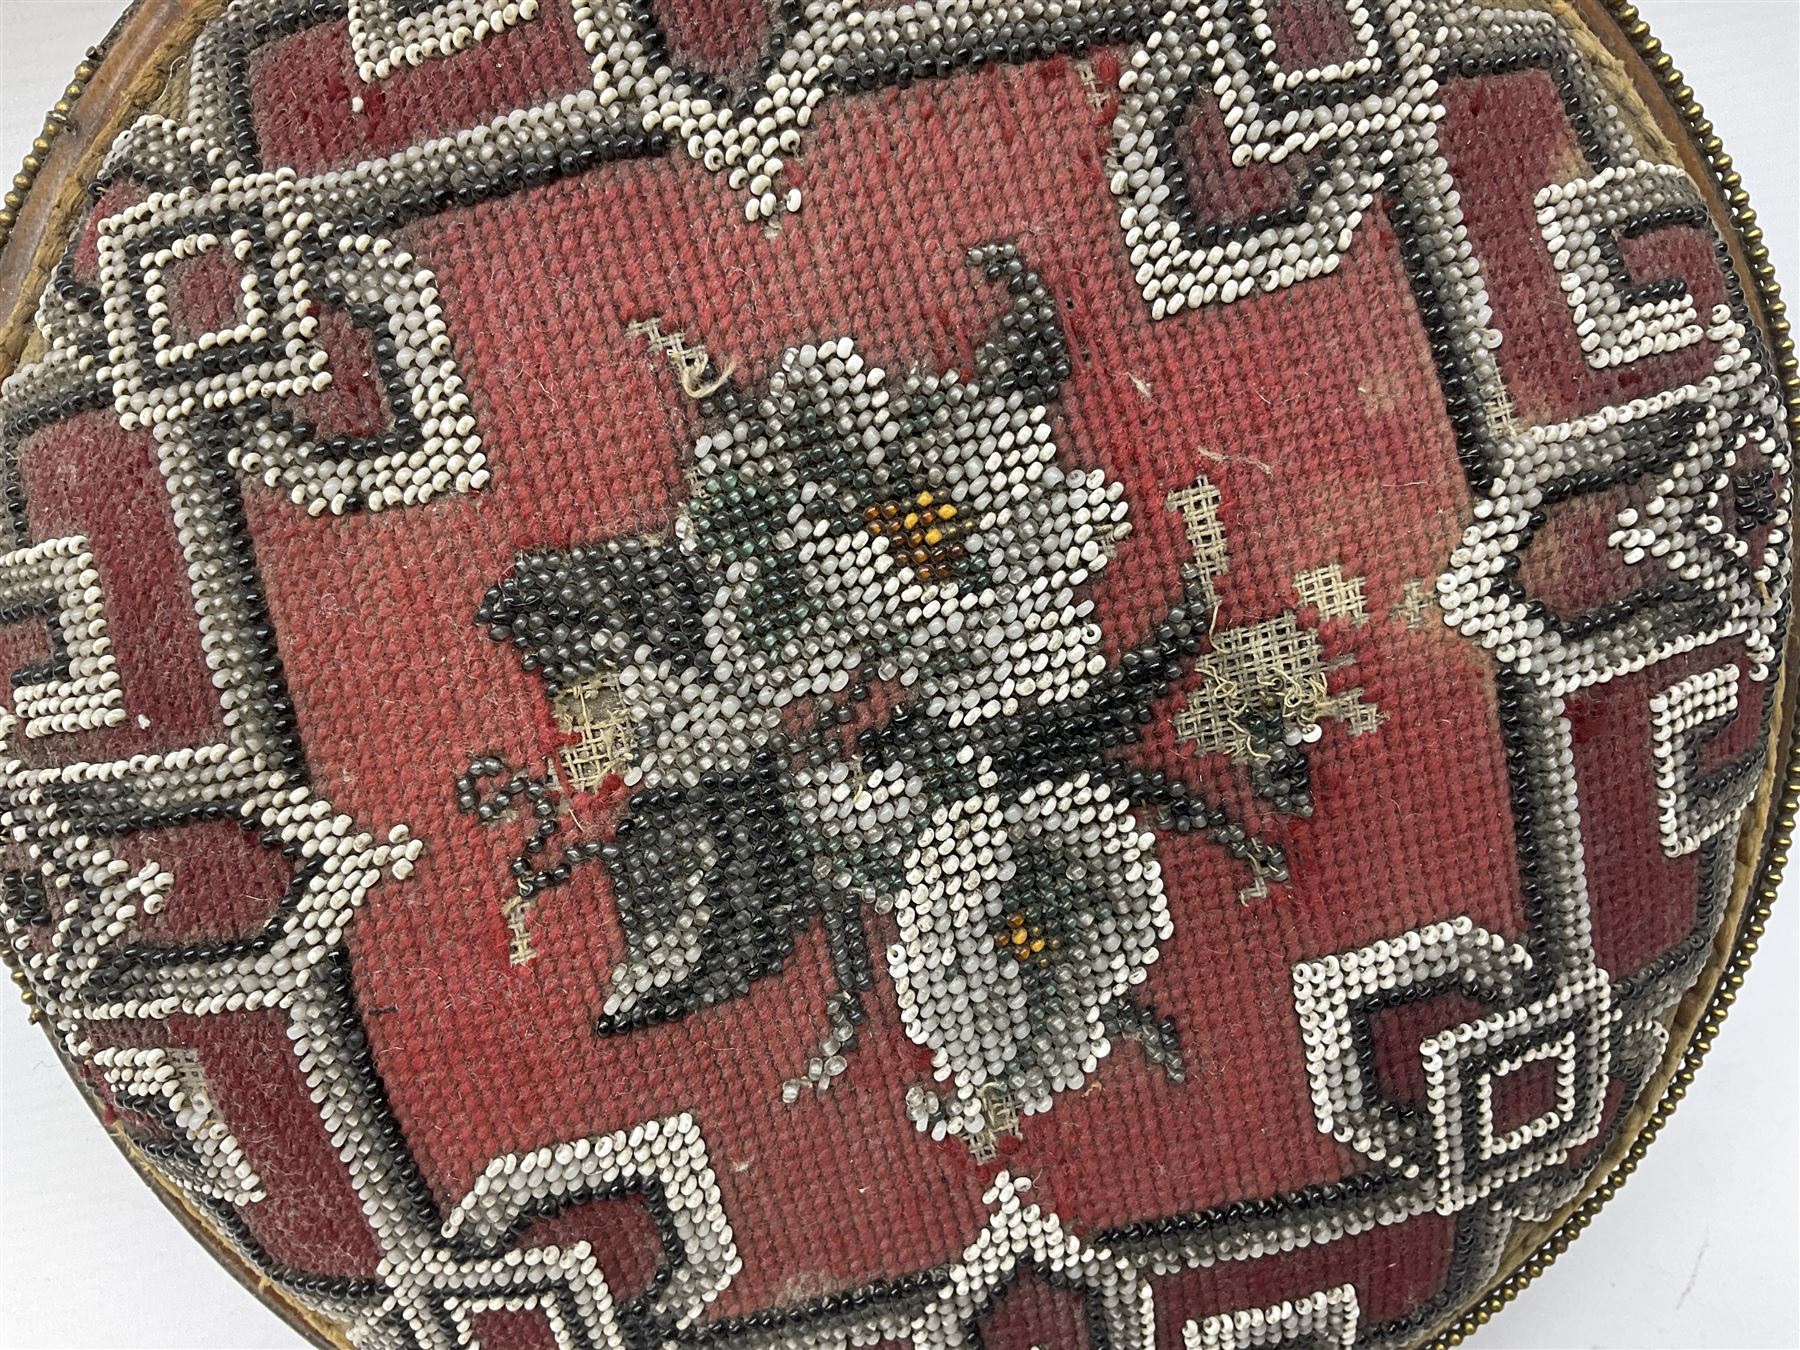 Pair of Victorian beadwork footstools of circular form with a beaded and needlework upholstery - Image 10 of 14